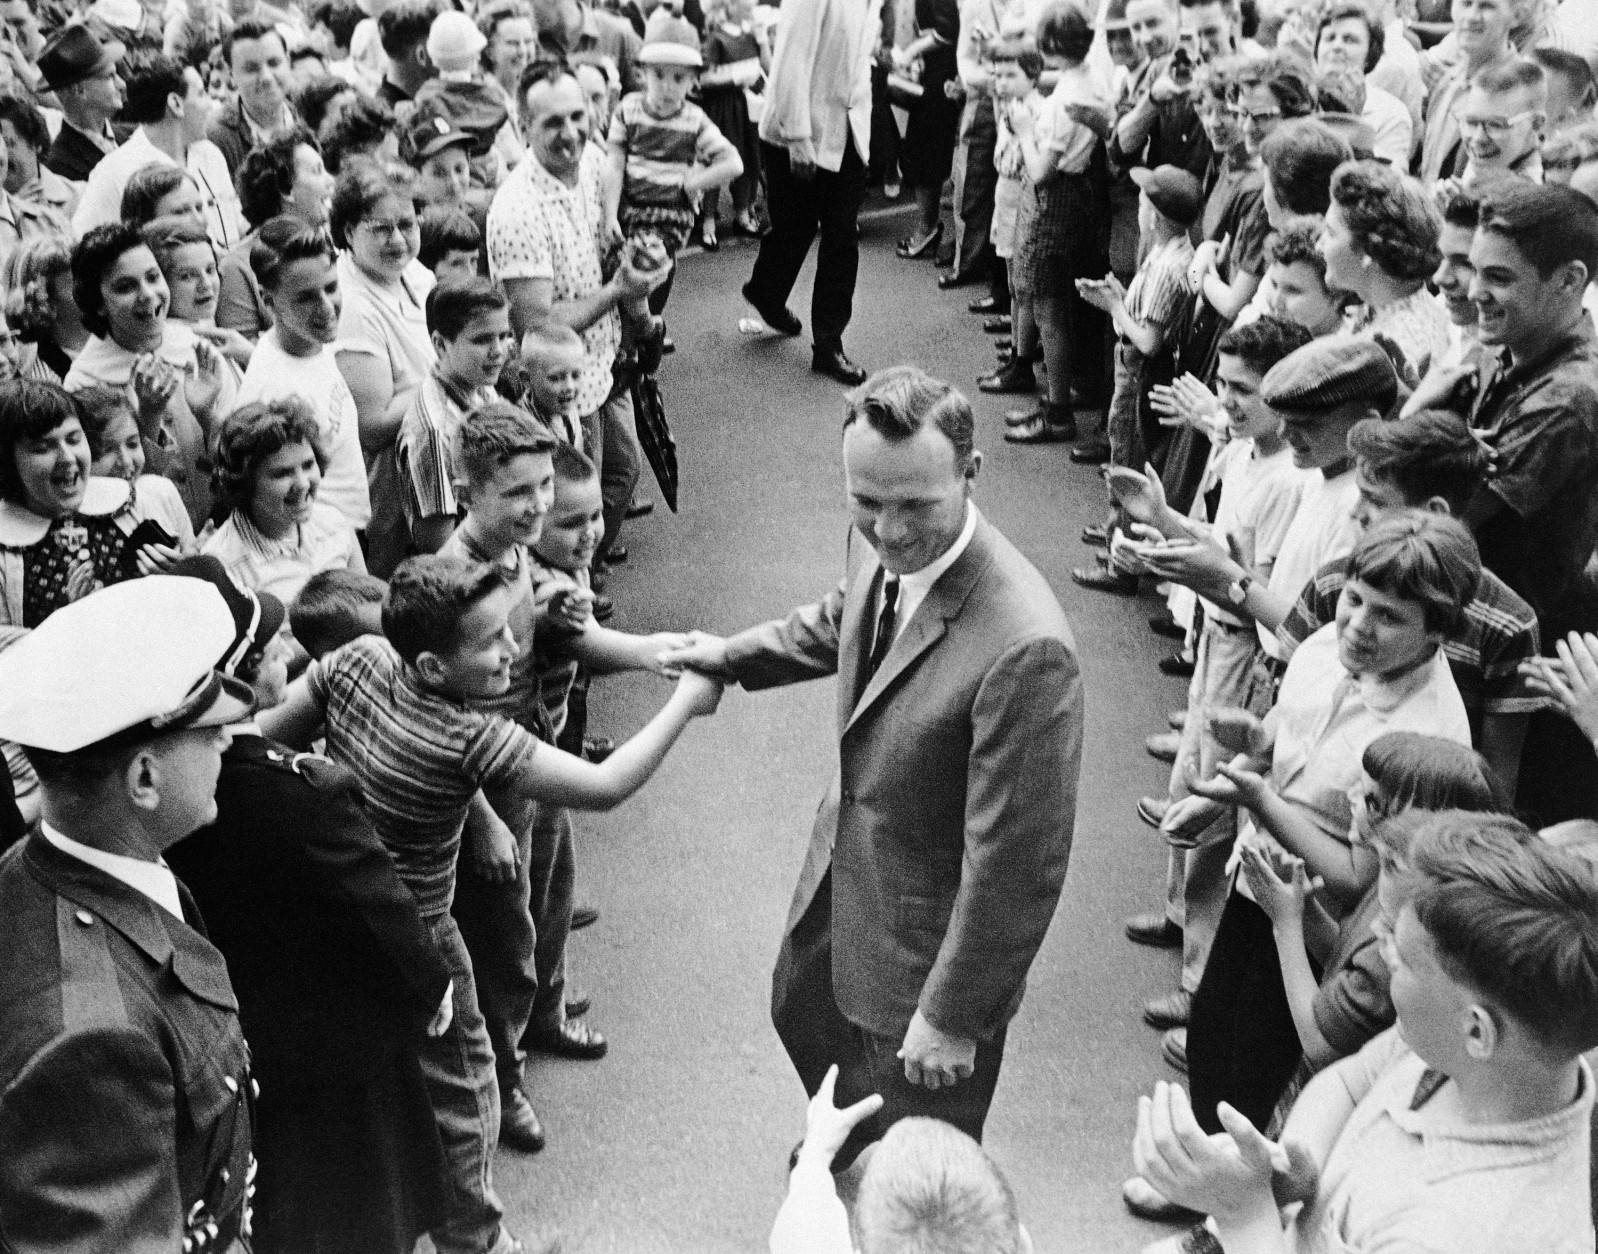 File-This April 16, 1960, file photo shows a grinning Arnold Palmer surrounded by applauding citizens of his native Latrobe,Pa., shaking hands with a couple of enthusiastic boys. Palmer, who made golf popular for the masses with his hard-charging style, incomparable charisma and a personal touch that made him known throughout the golf world as "The King," died Sunday, Sept. 25, 2016, in Pittsburgh. He was 87.  (AP Photo/File)